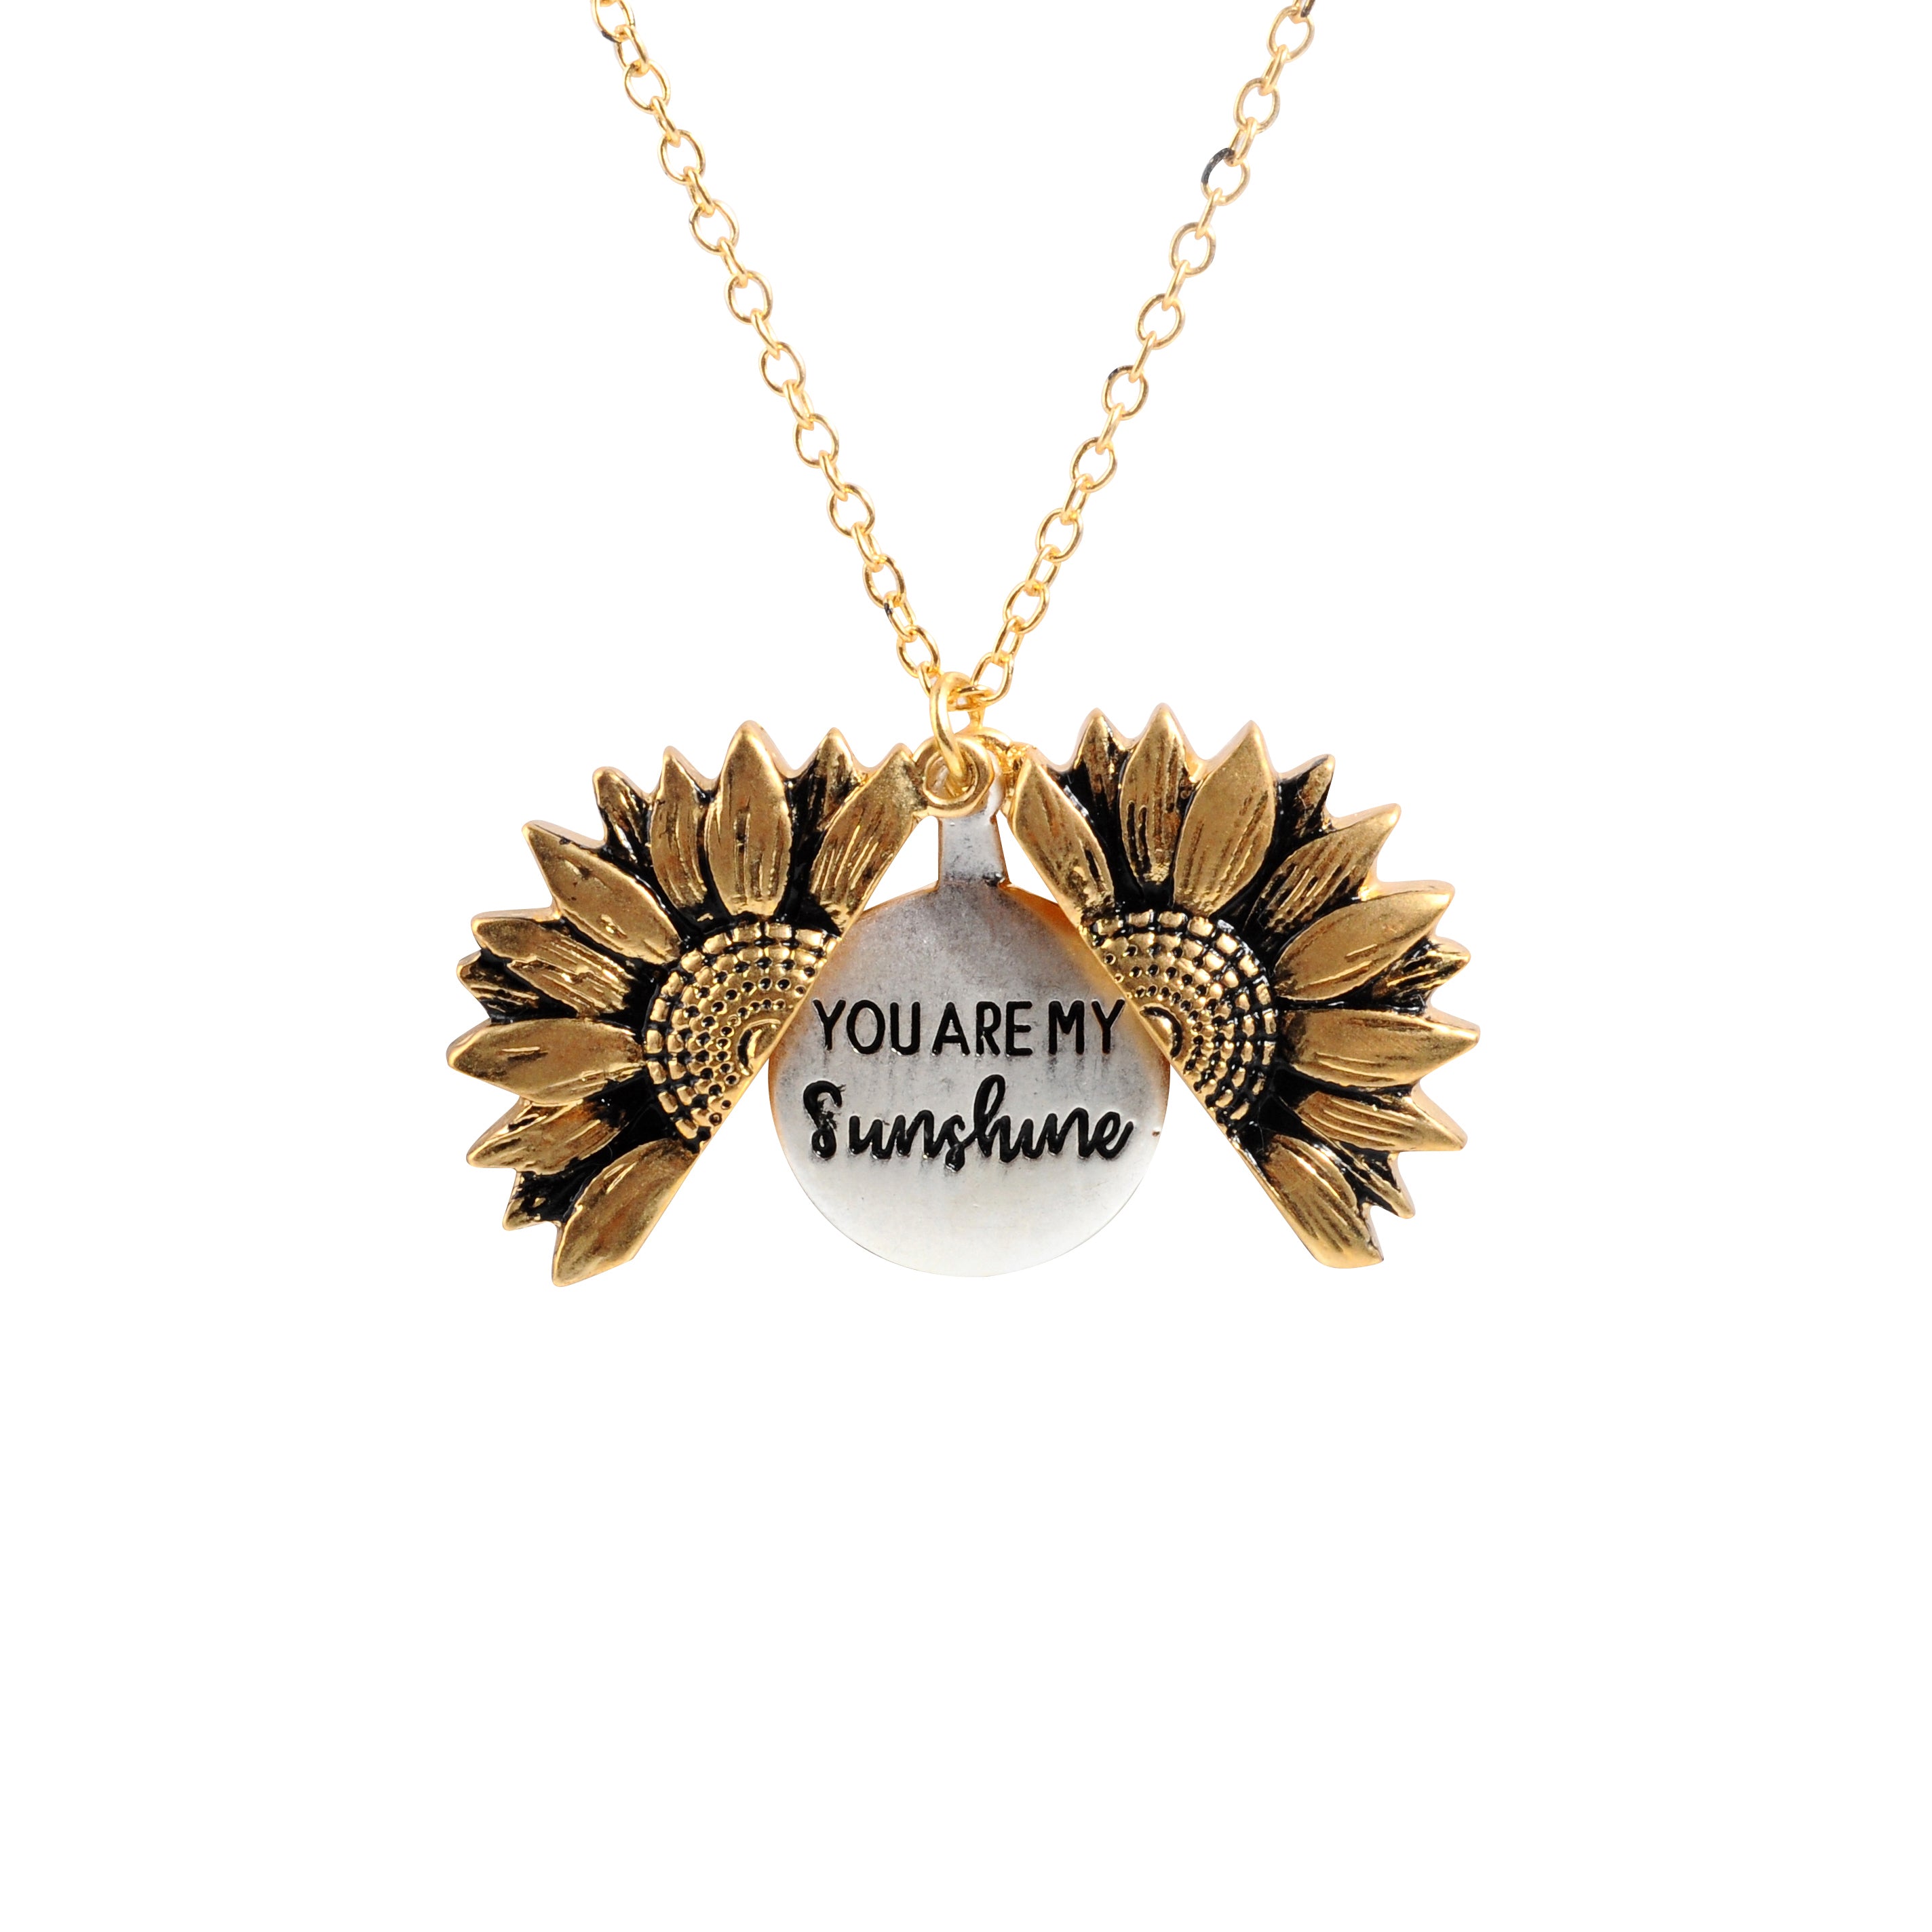 Fashion Bohemia Sunflower Double-layer Metal Pendant Necklace For Women Open Long Chain Necklace Lettering you are my sunshine